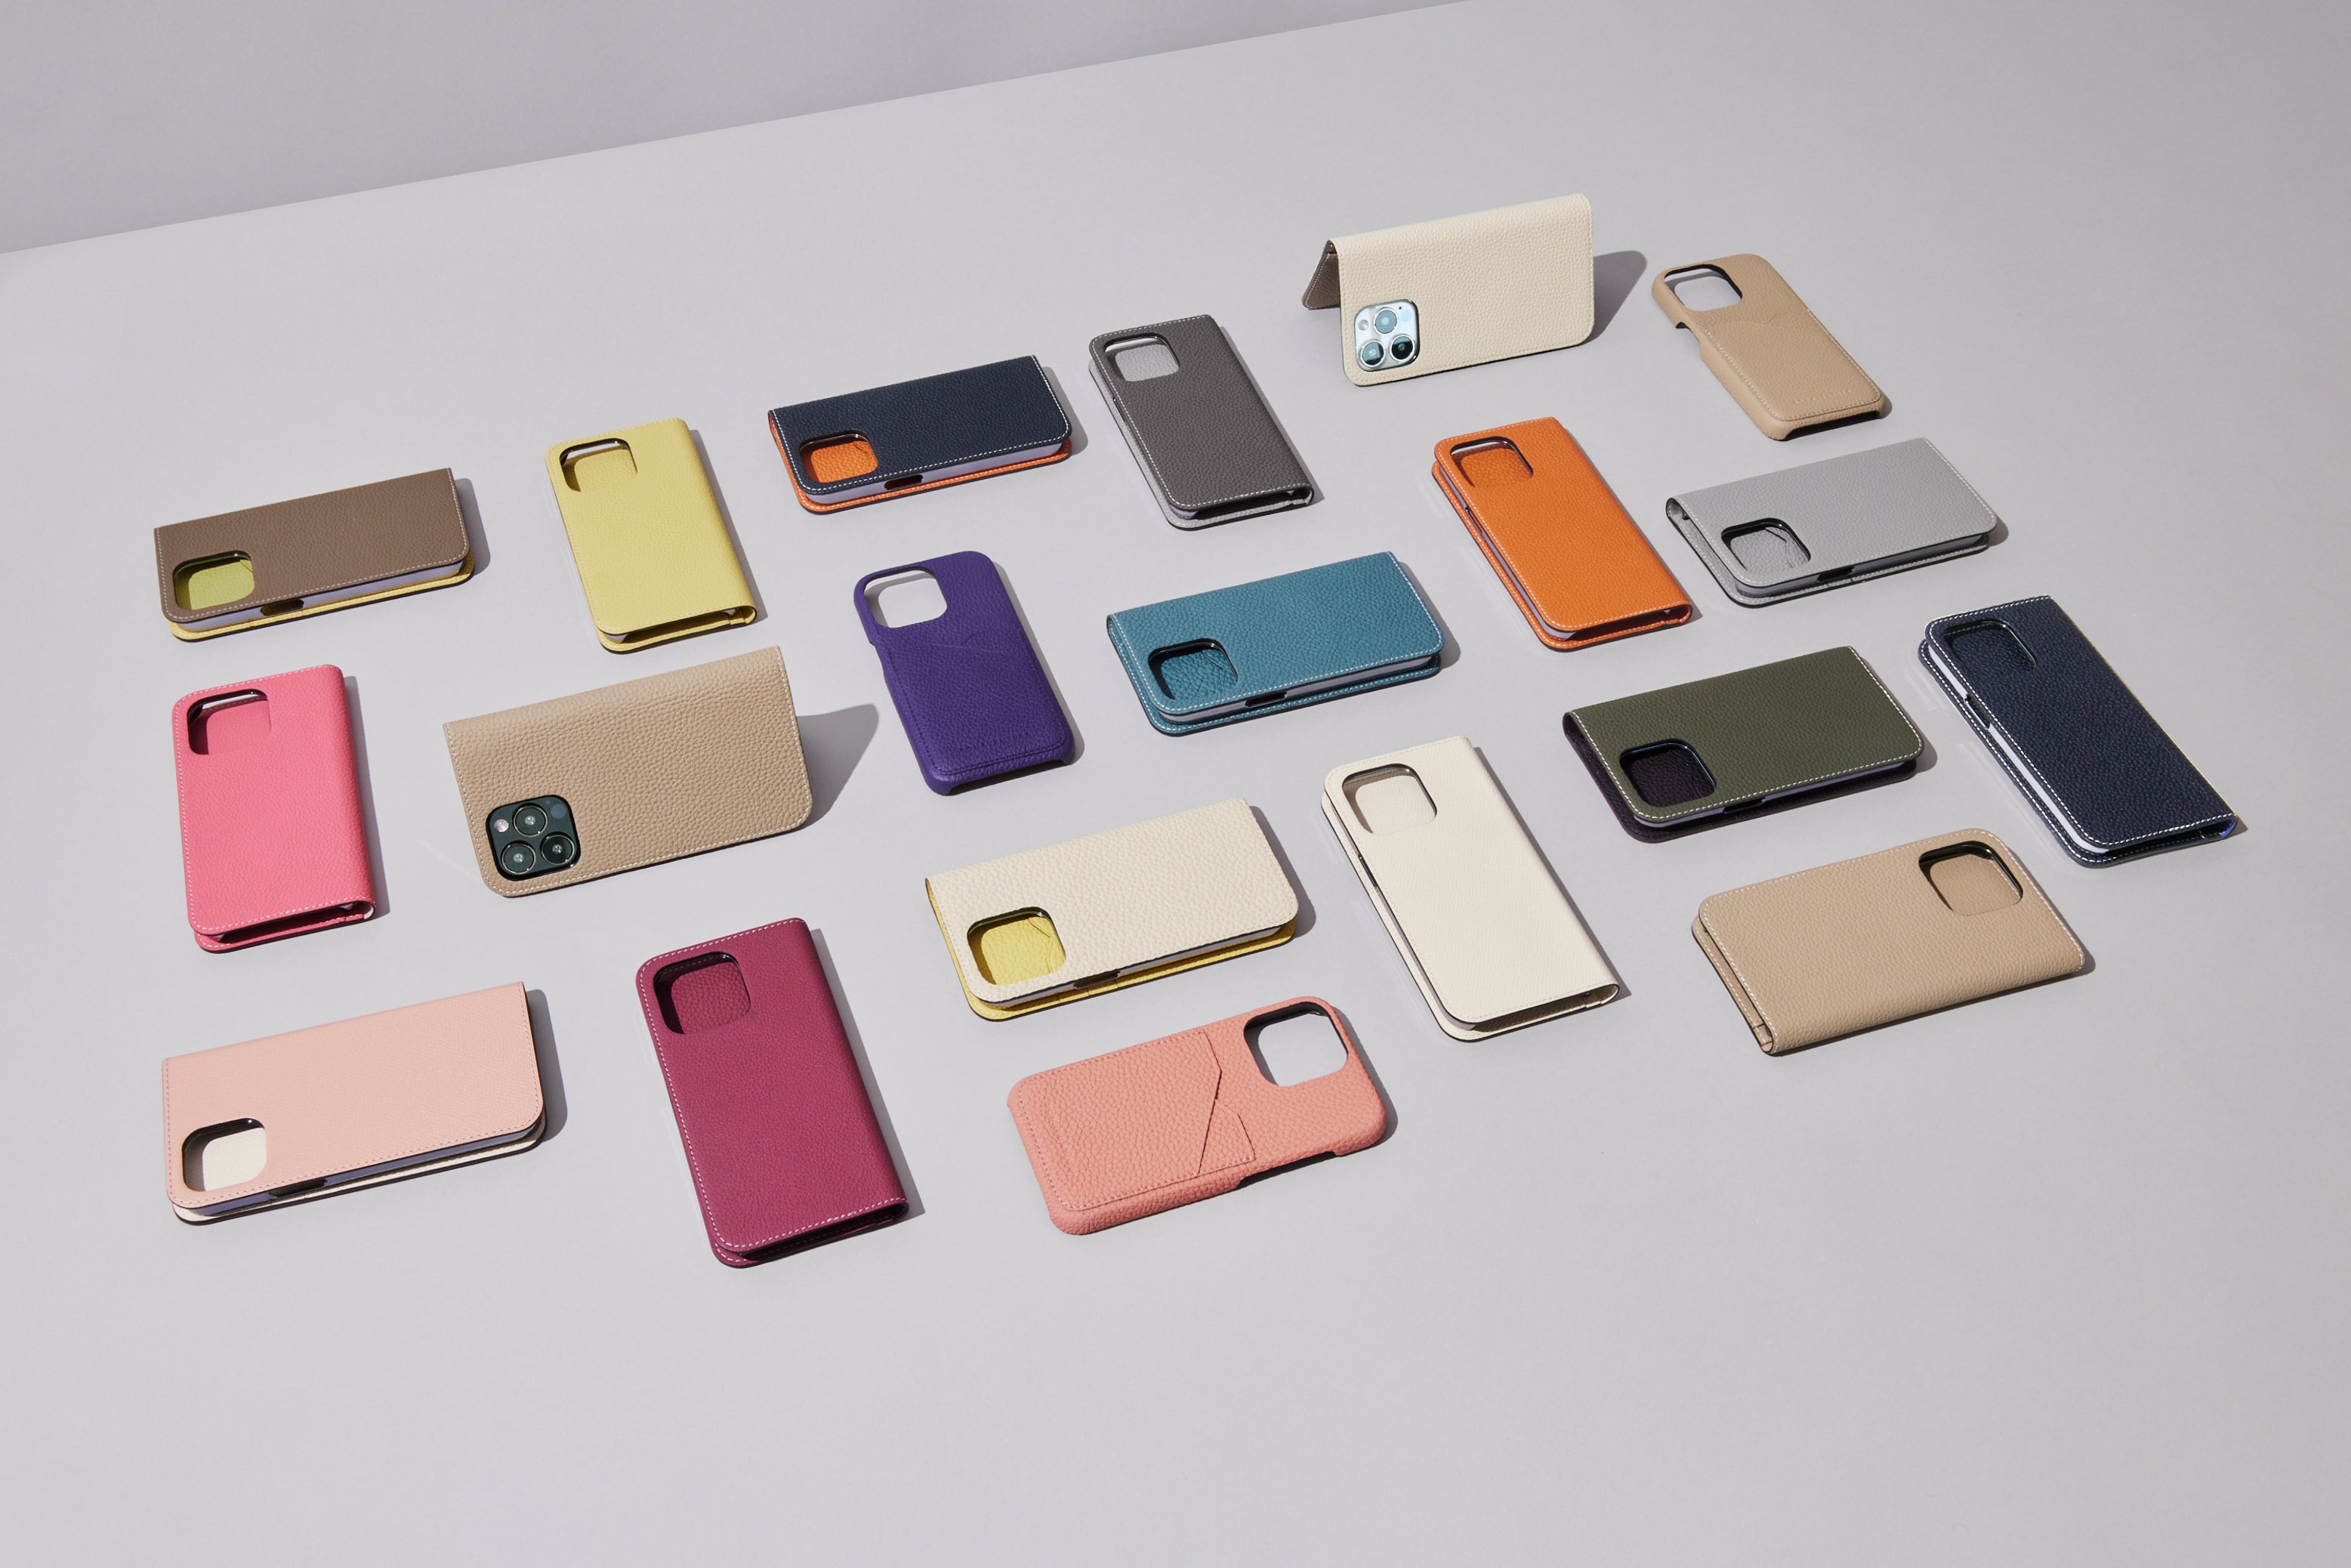 A wide selection of high-quality iPhone leather cases from BONAVENTURA.